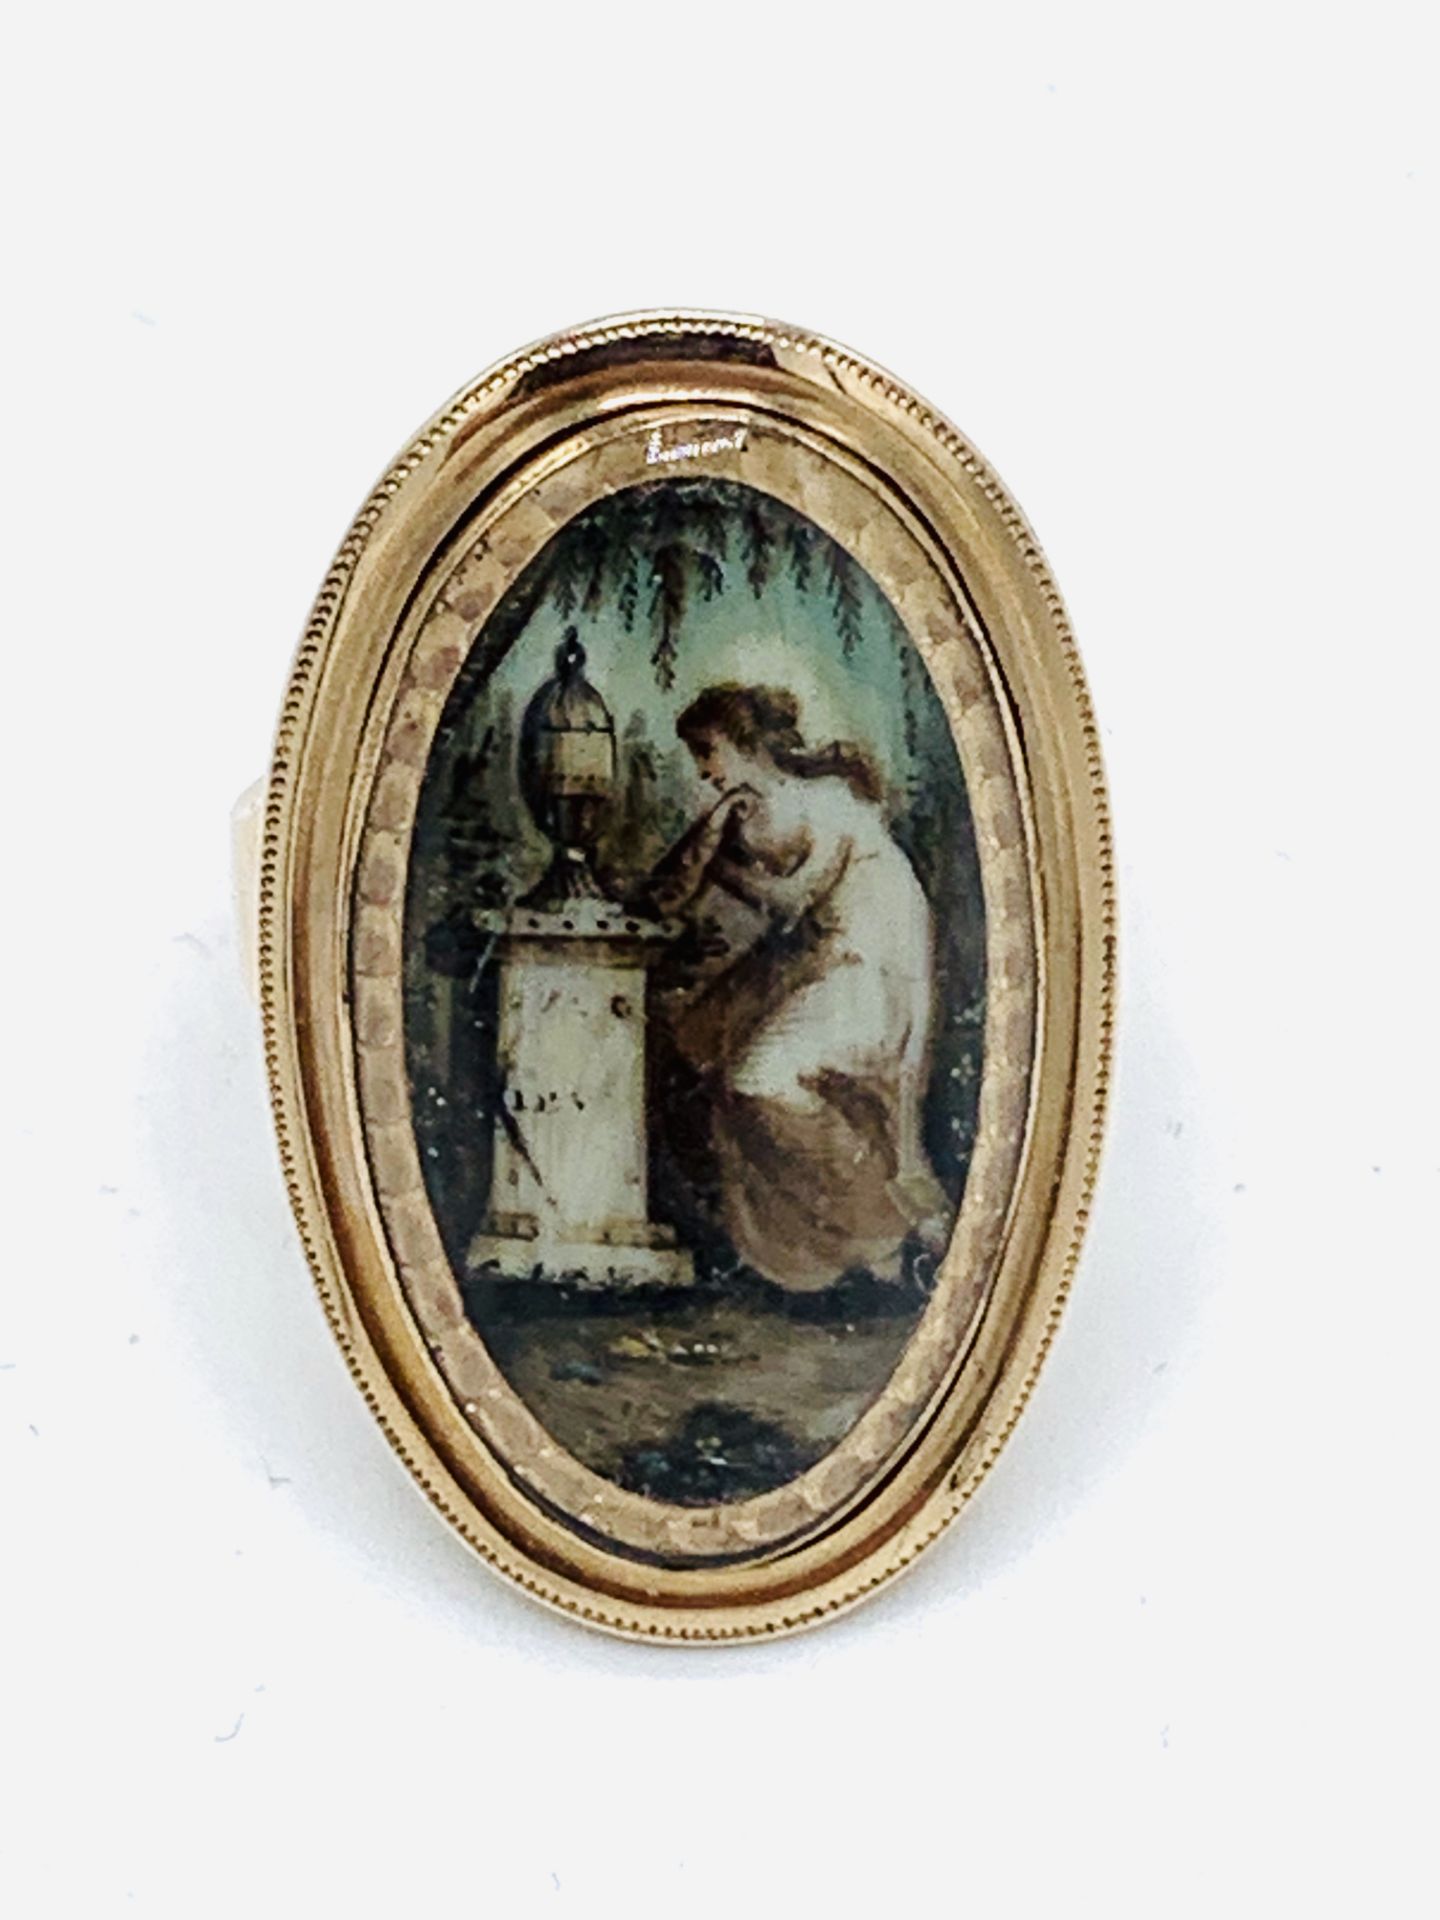 Georgian portrait ring dated 1792. Length 30mm, width 20mm. Size M. Wt. 6.5gms. Inscribed underside - Image 4 of 4